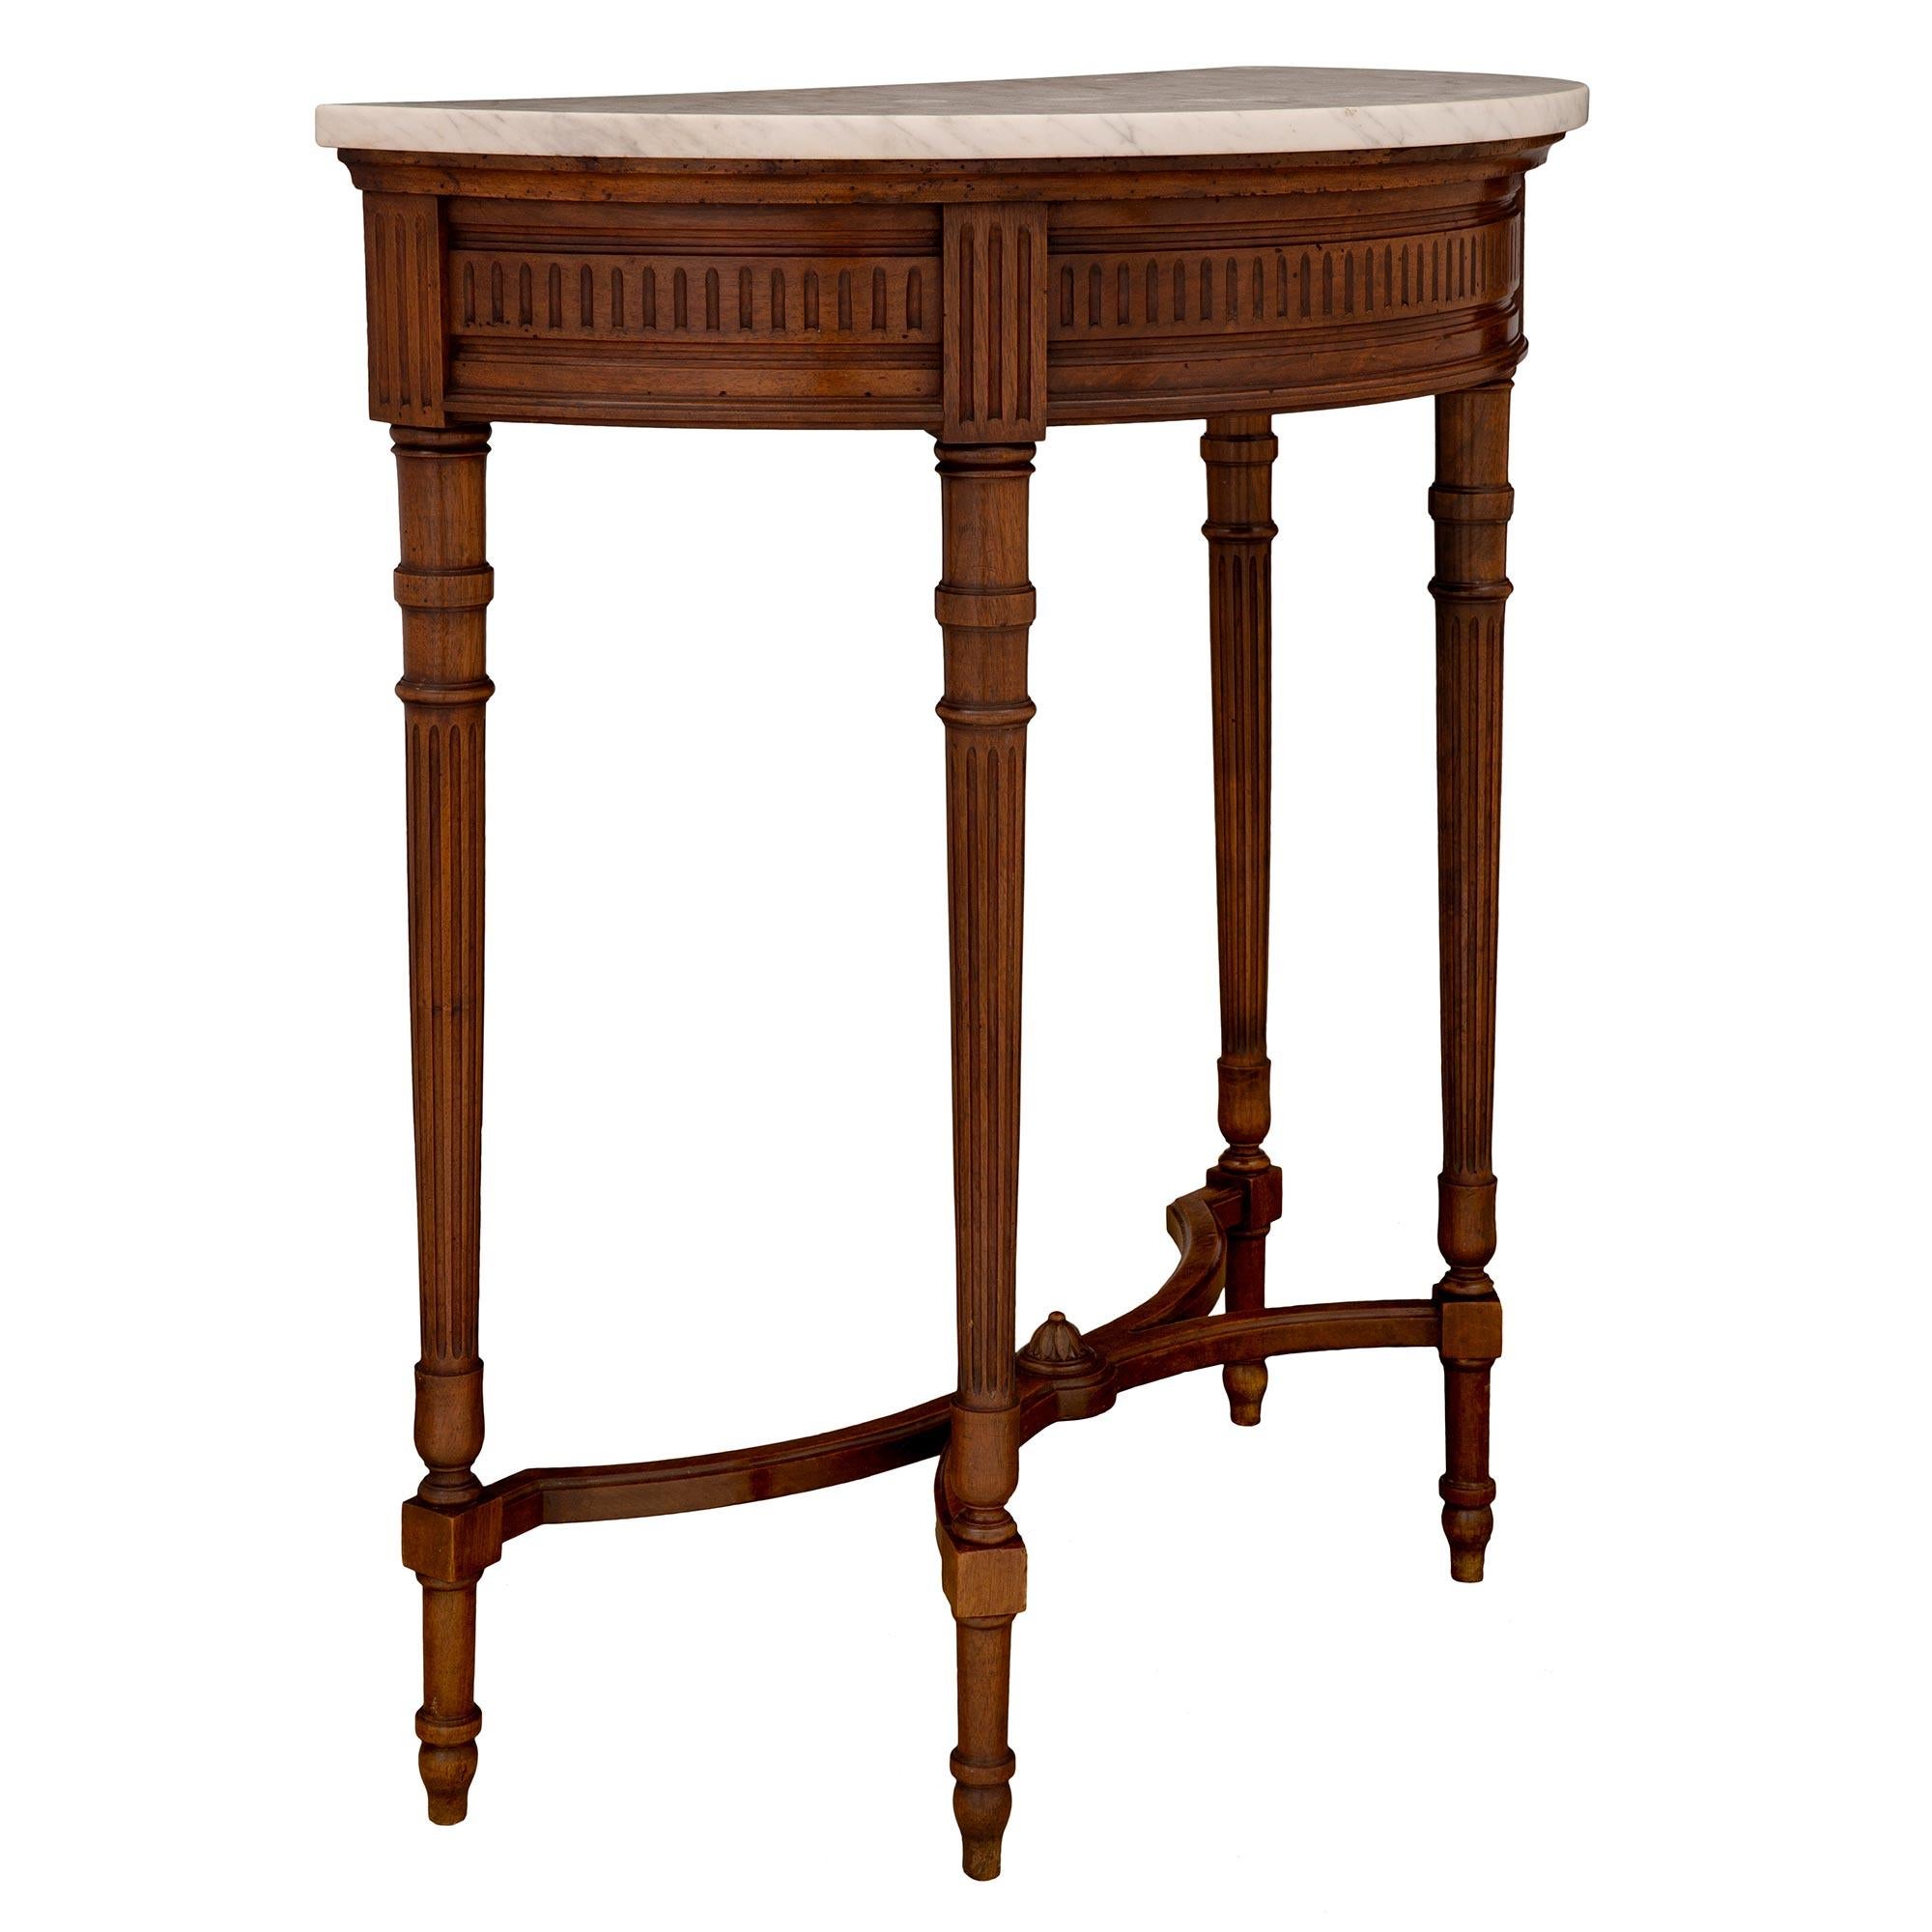 French 19th Century Louis XVI Style Walnut and Marble Demilune Console In Good Condition For Sale In West Palm Beach, FL